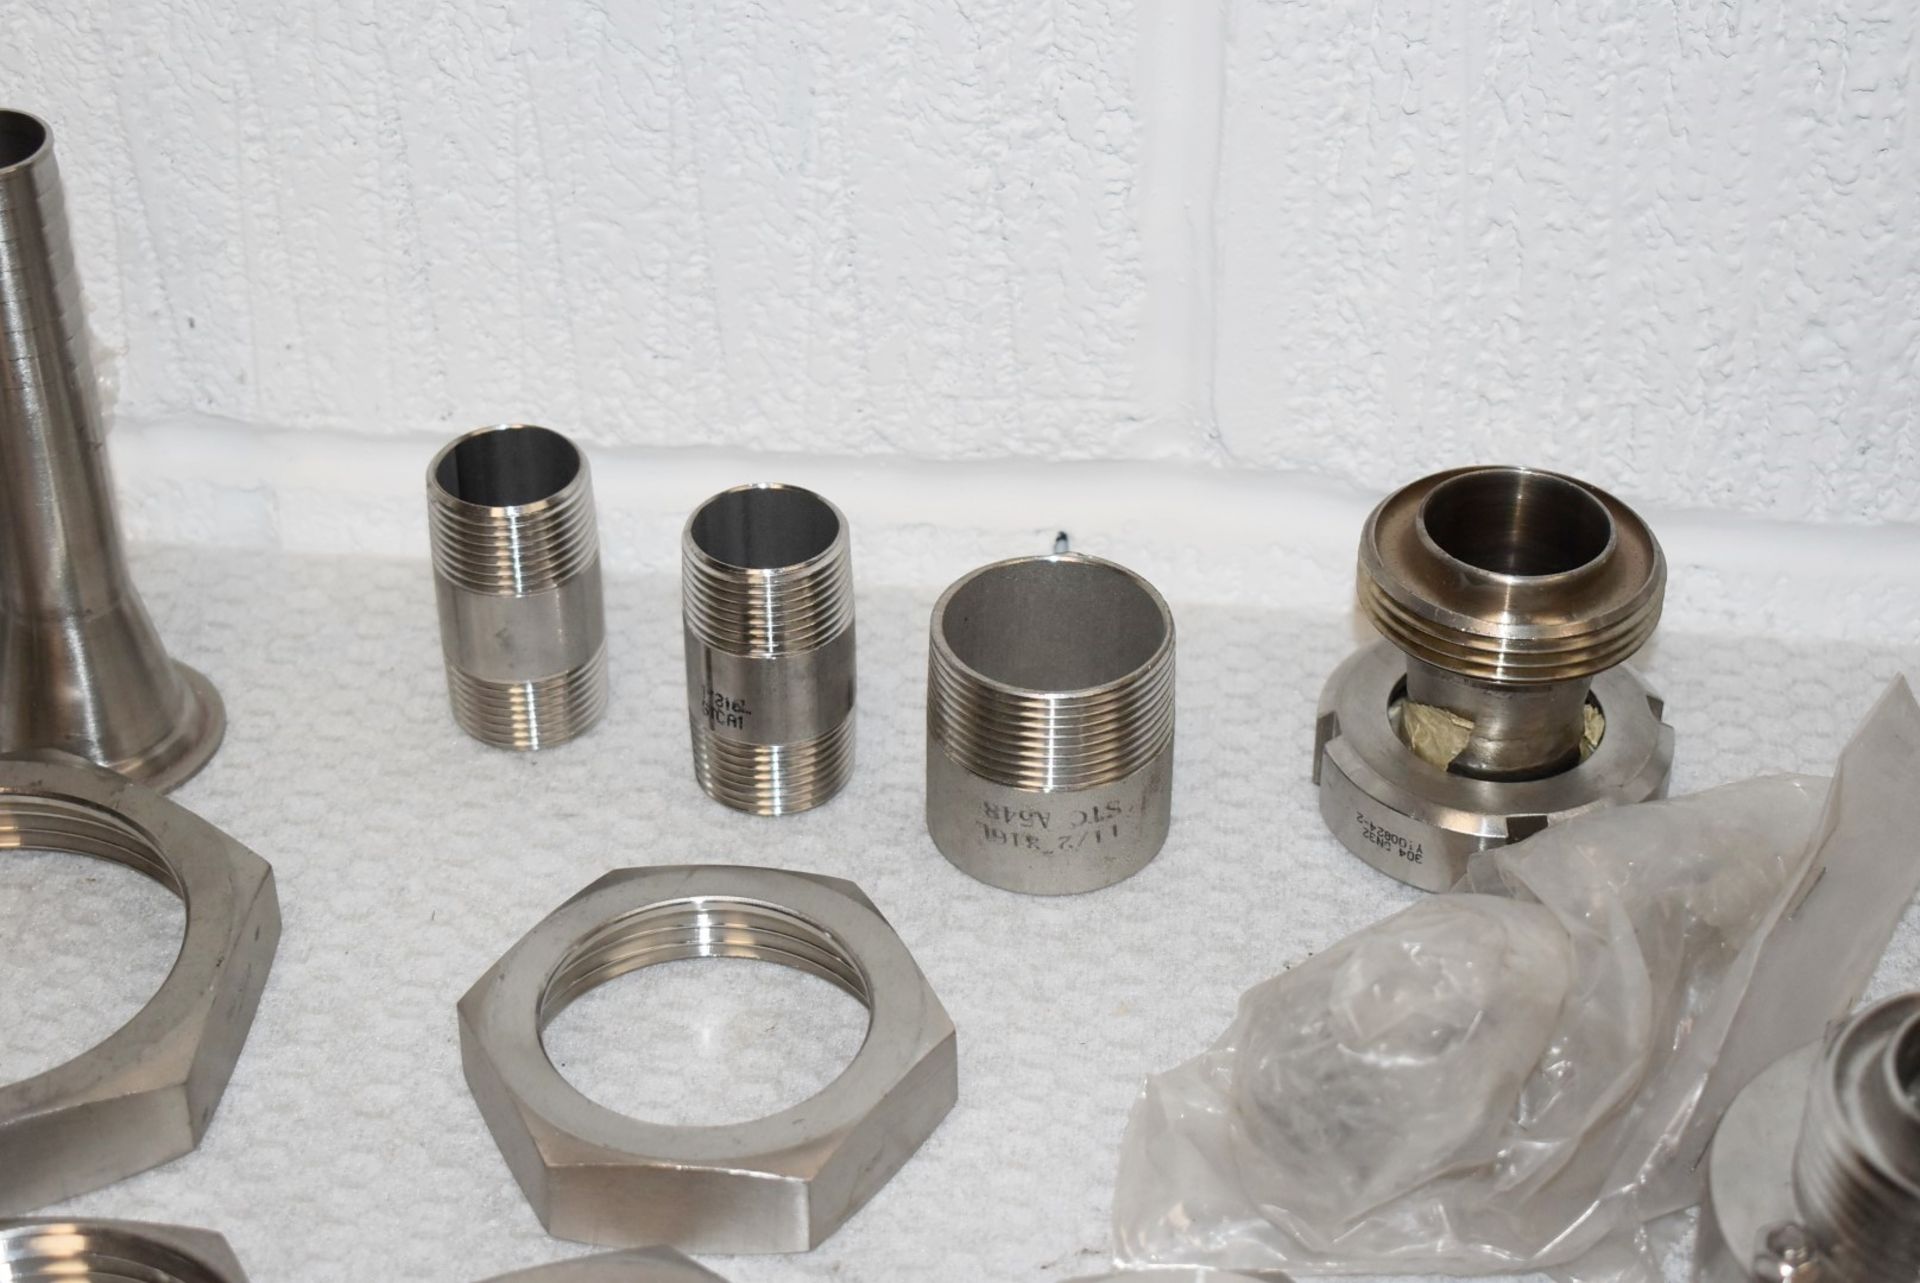 Assorted Job Lot of Stainless Steel Fittings For Brewery Equipment - Includes Approx 140 Pieces - - Image 9 of 18